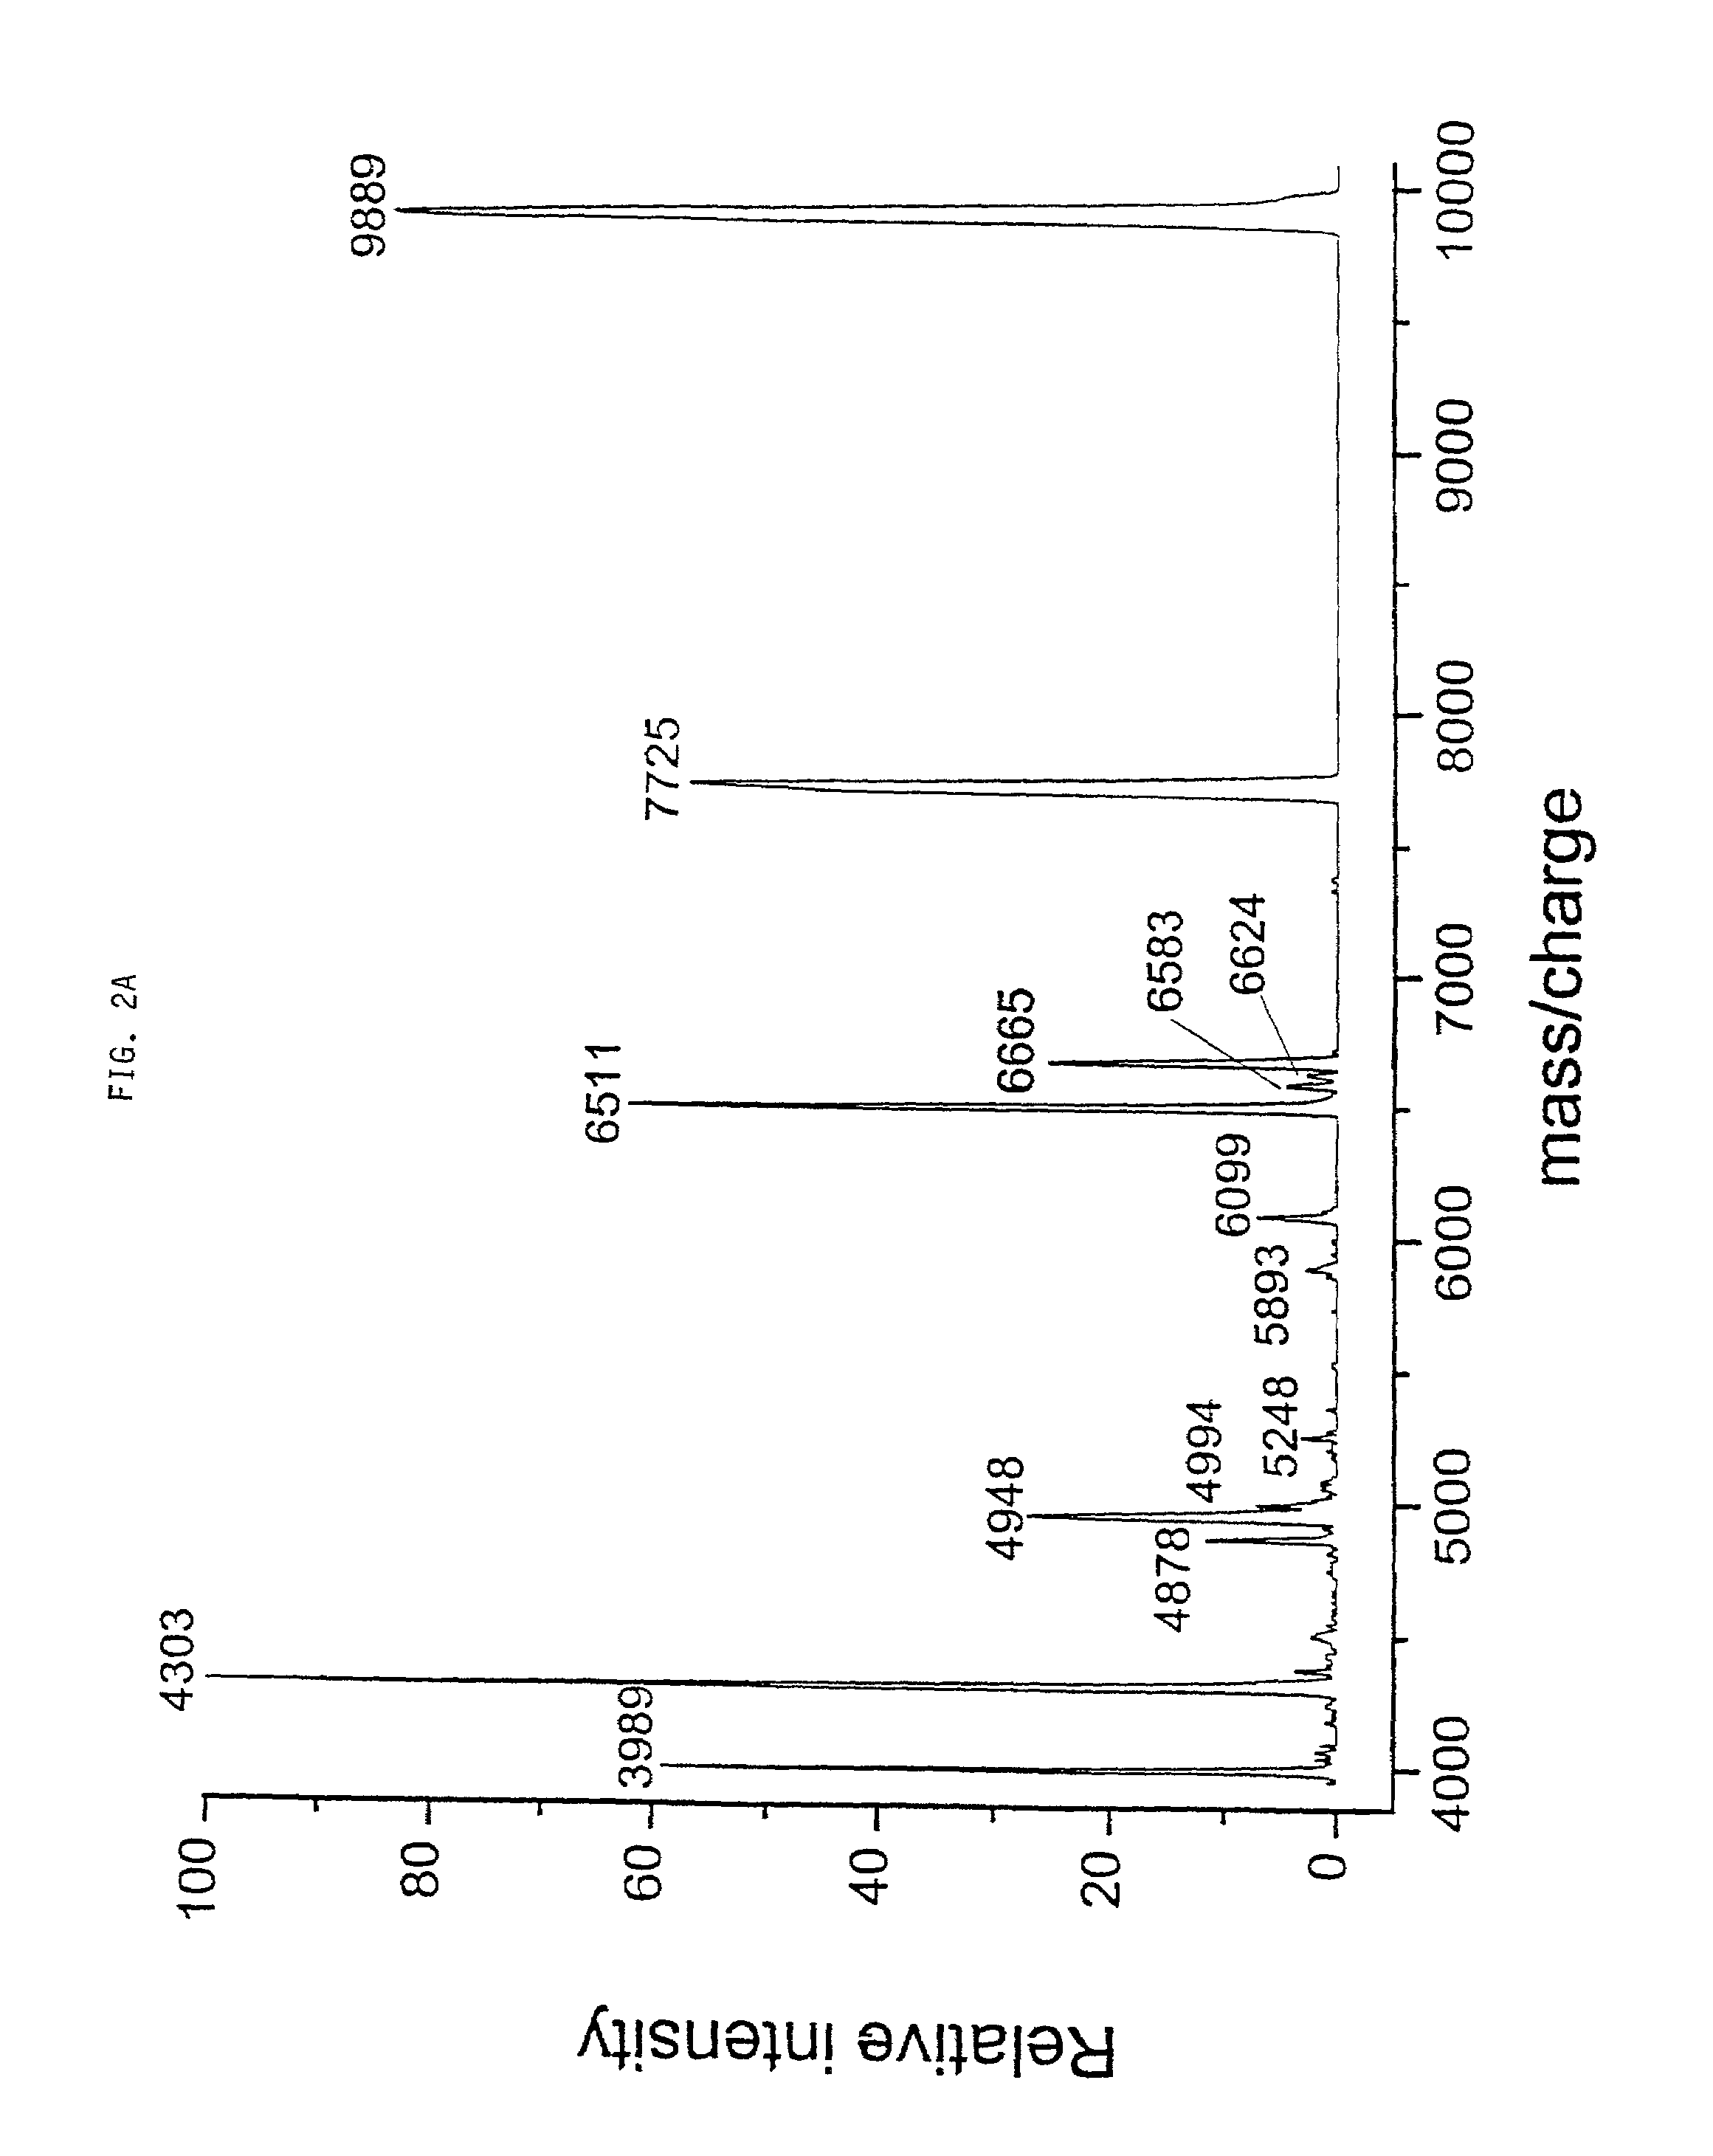 Methods for identifying and classifying organisms by mass spectrometry and database searching